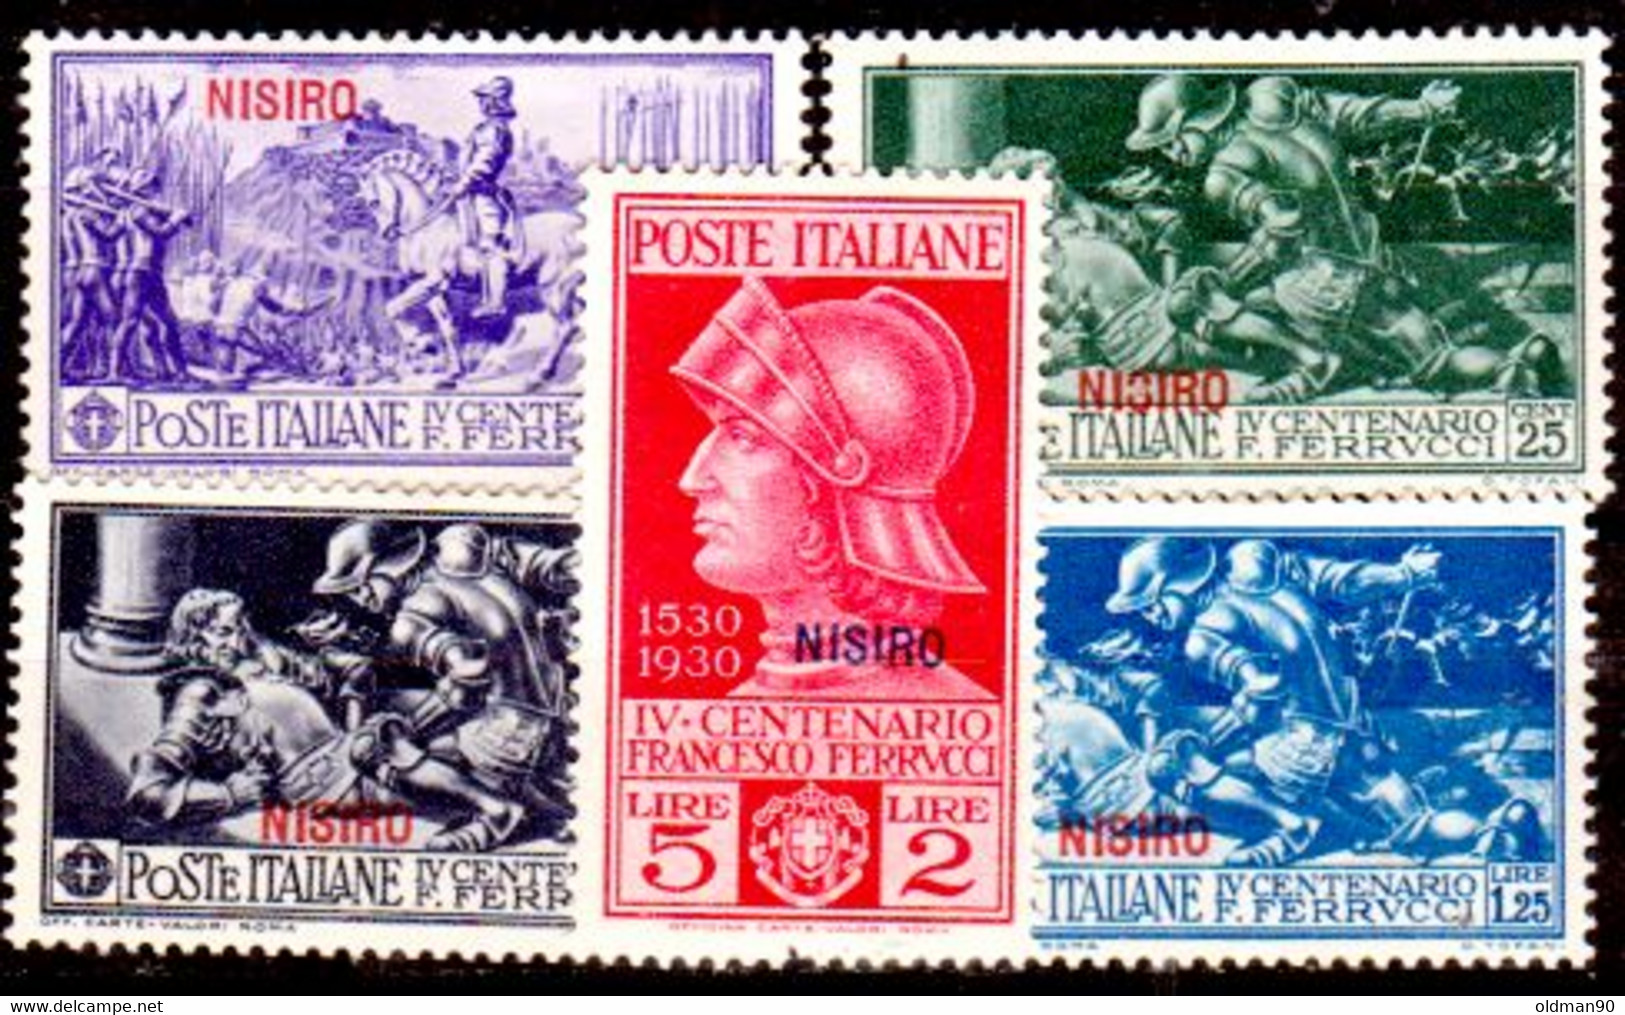 Egeo-OS-308- Nisiro: Original Stamps And Overprint 1930 (+) Hinged - Quality In Your Opinion. - Egeo (Nisiro)